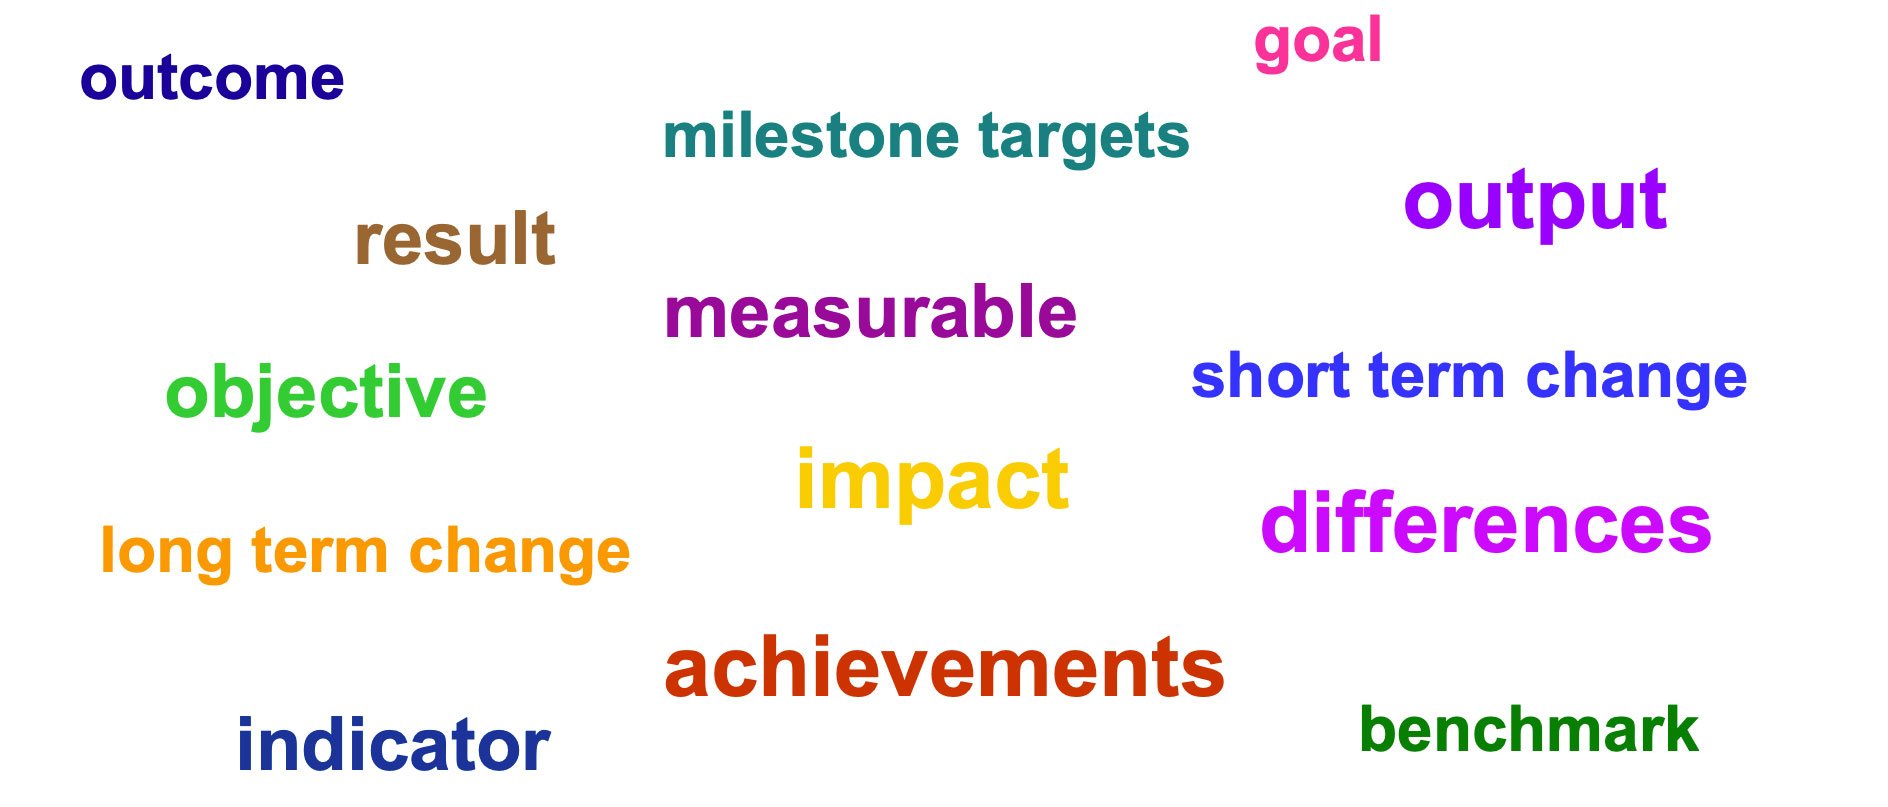 Outcomes - 2013 word cloud